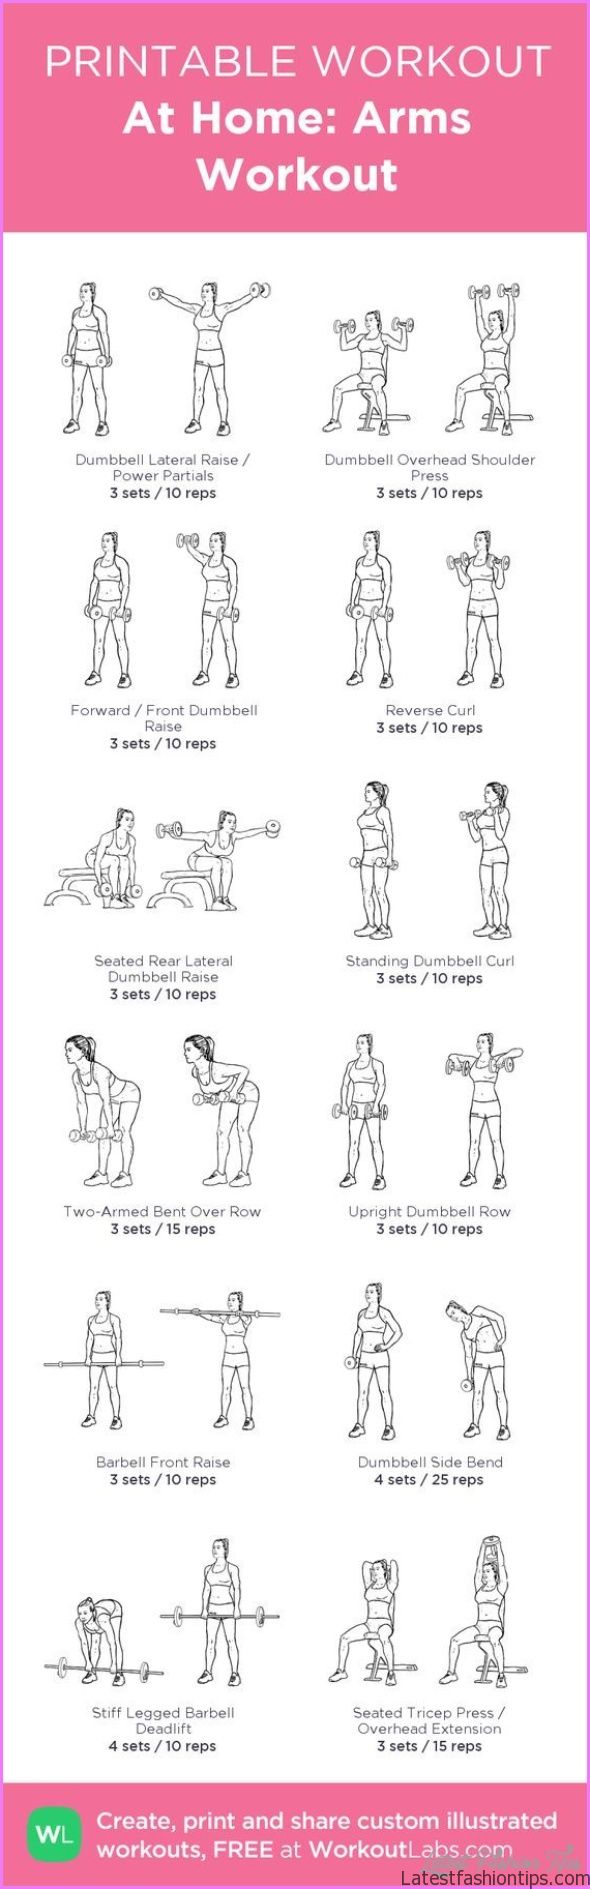 dumbell-workout-for-weight-loss-off-50